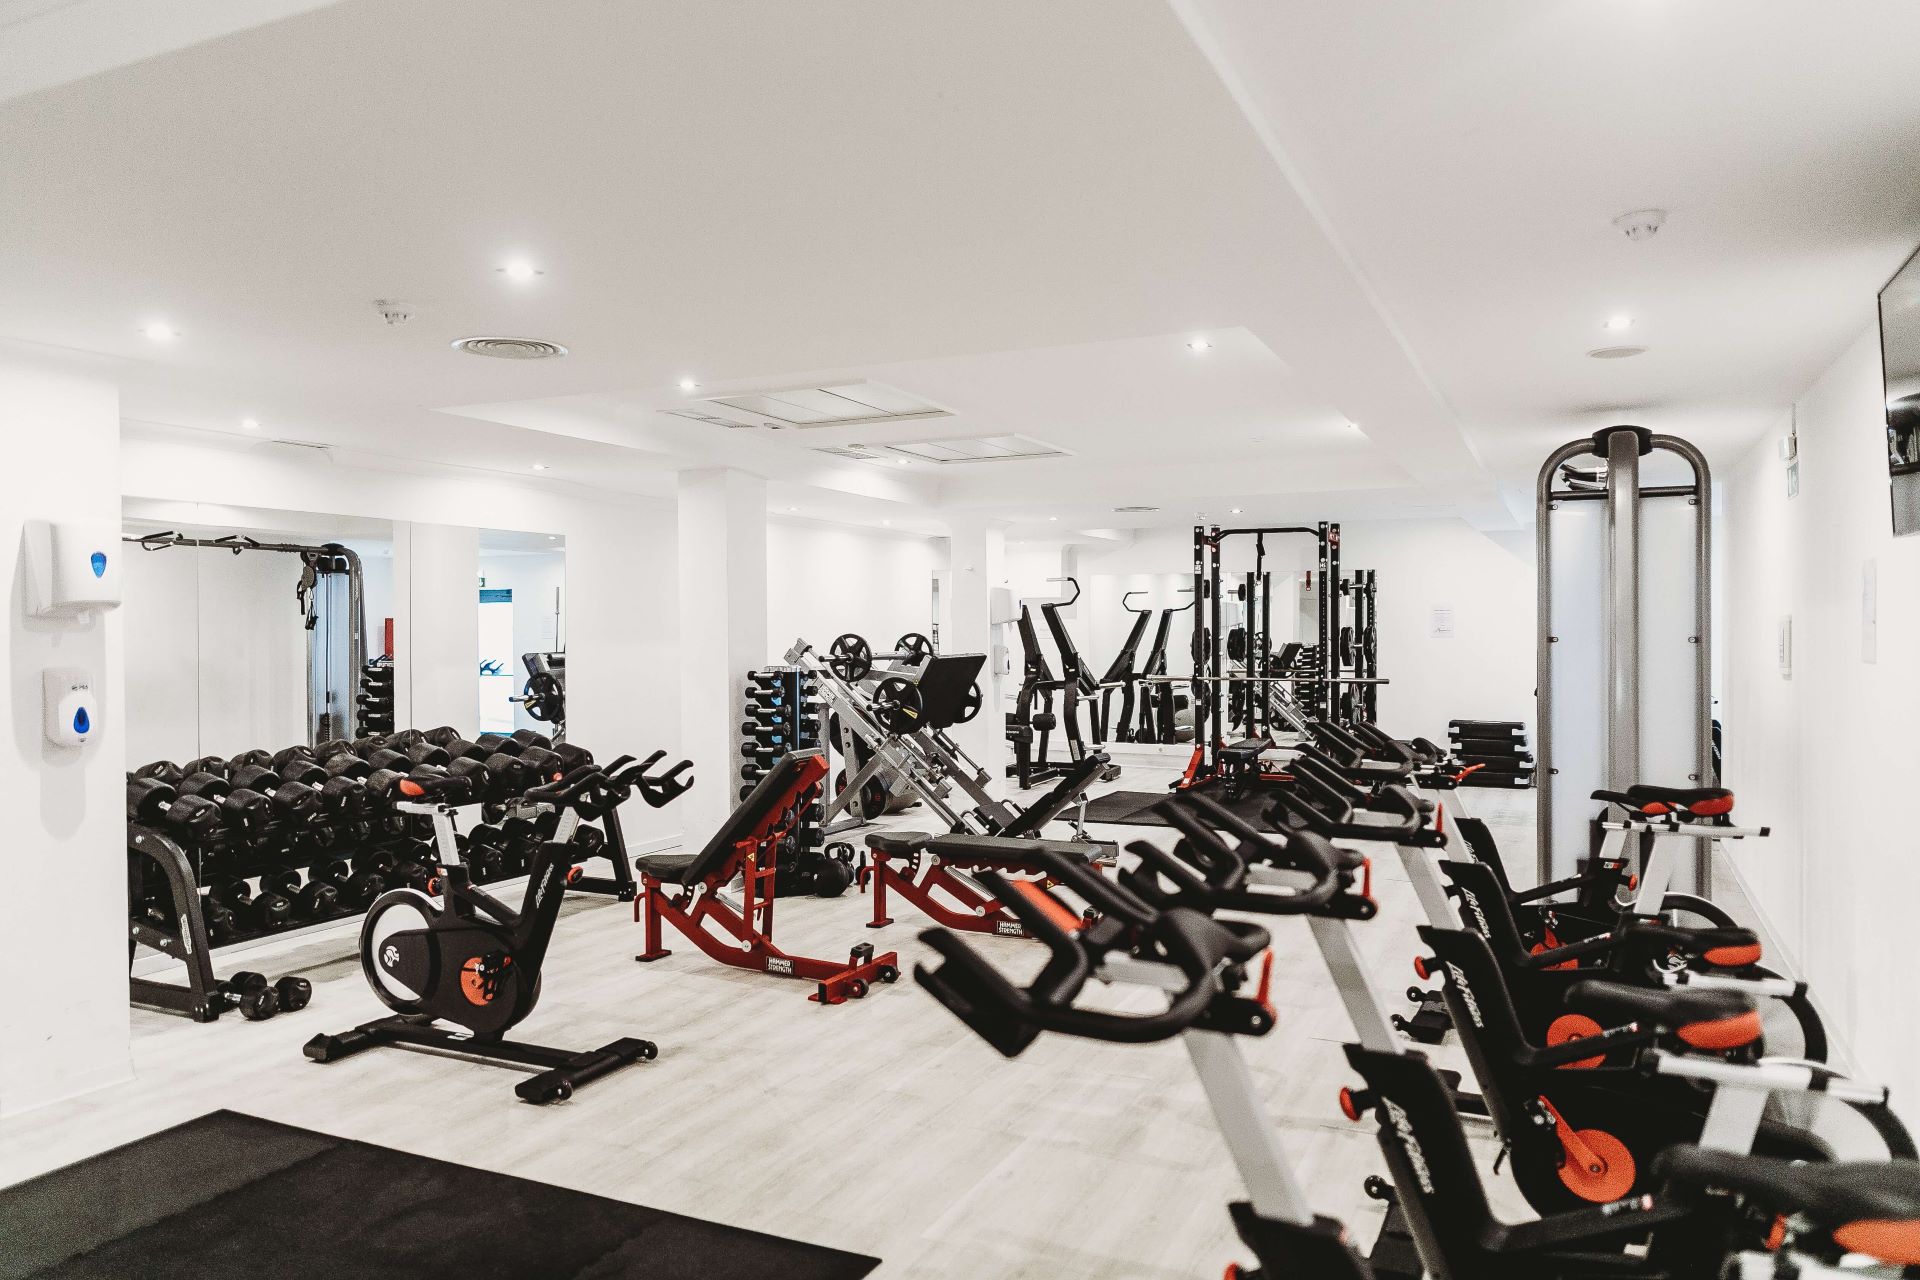 Can installing LED lighting in the gym help you save money